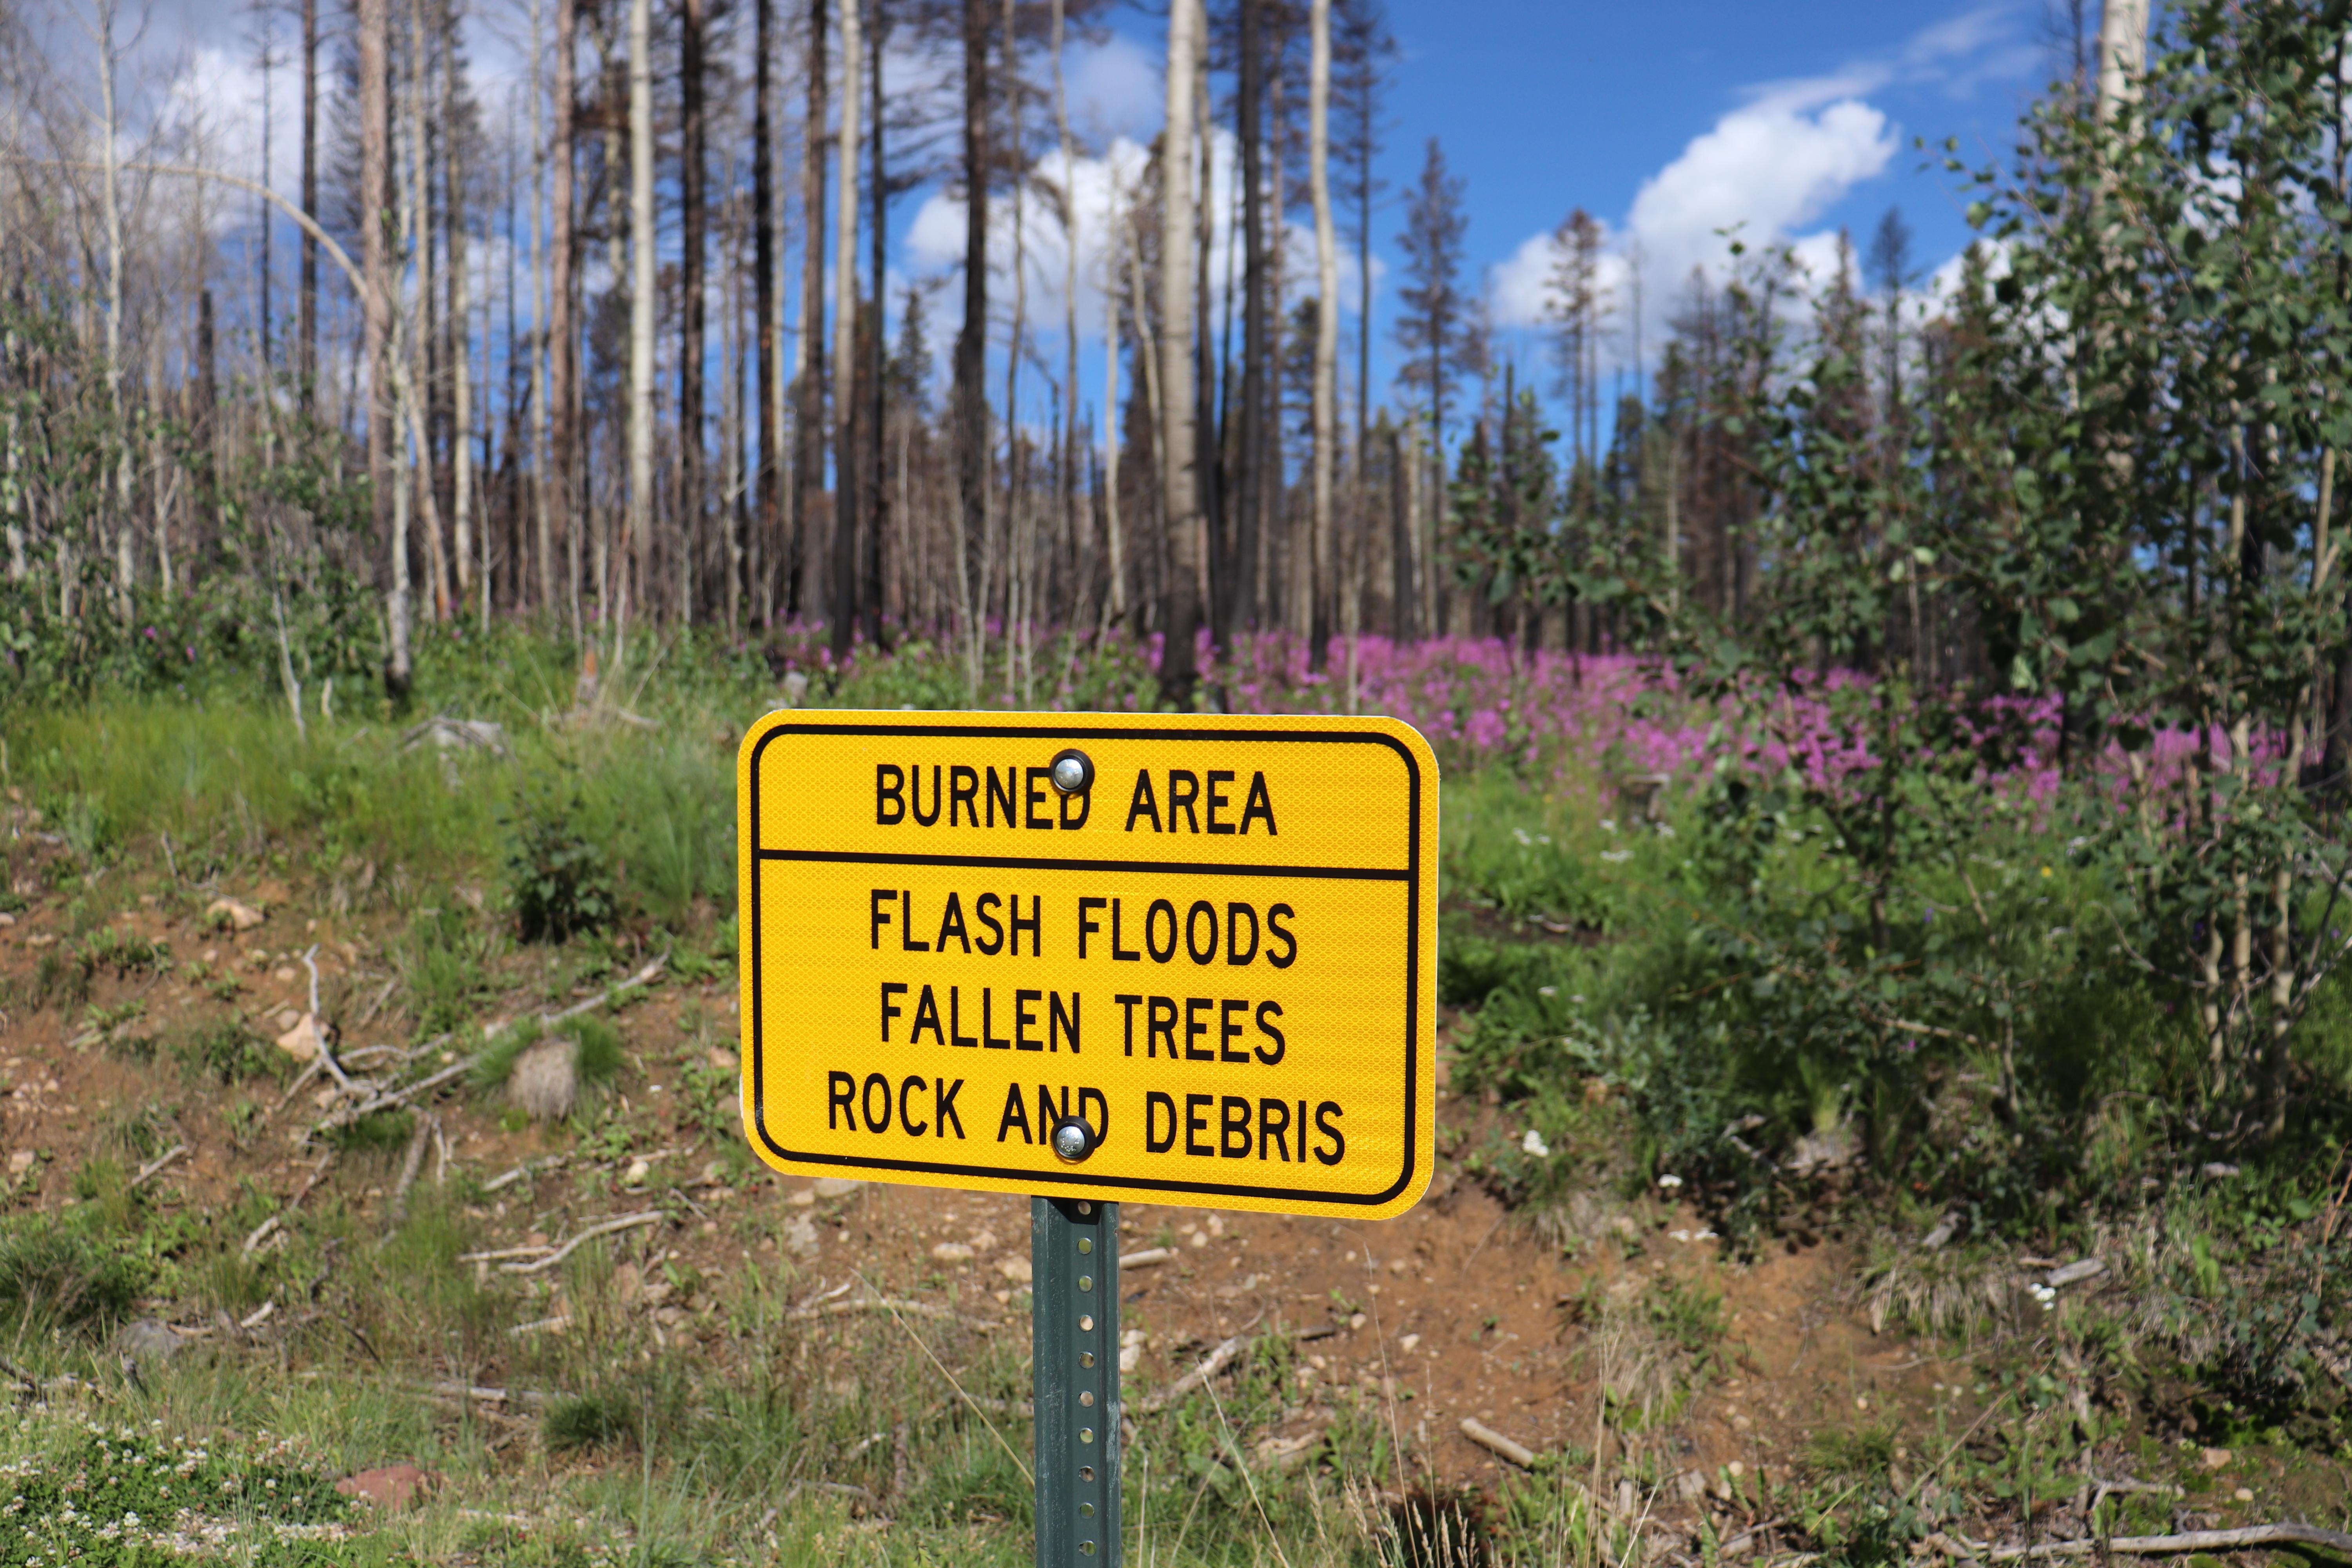 A sign marks the dangers of burned areas - flash floods, fallen trees, and rocks and debris.